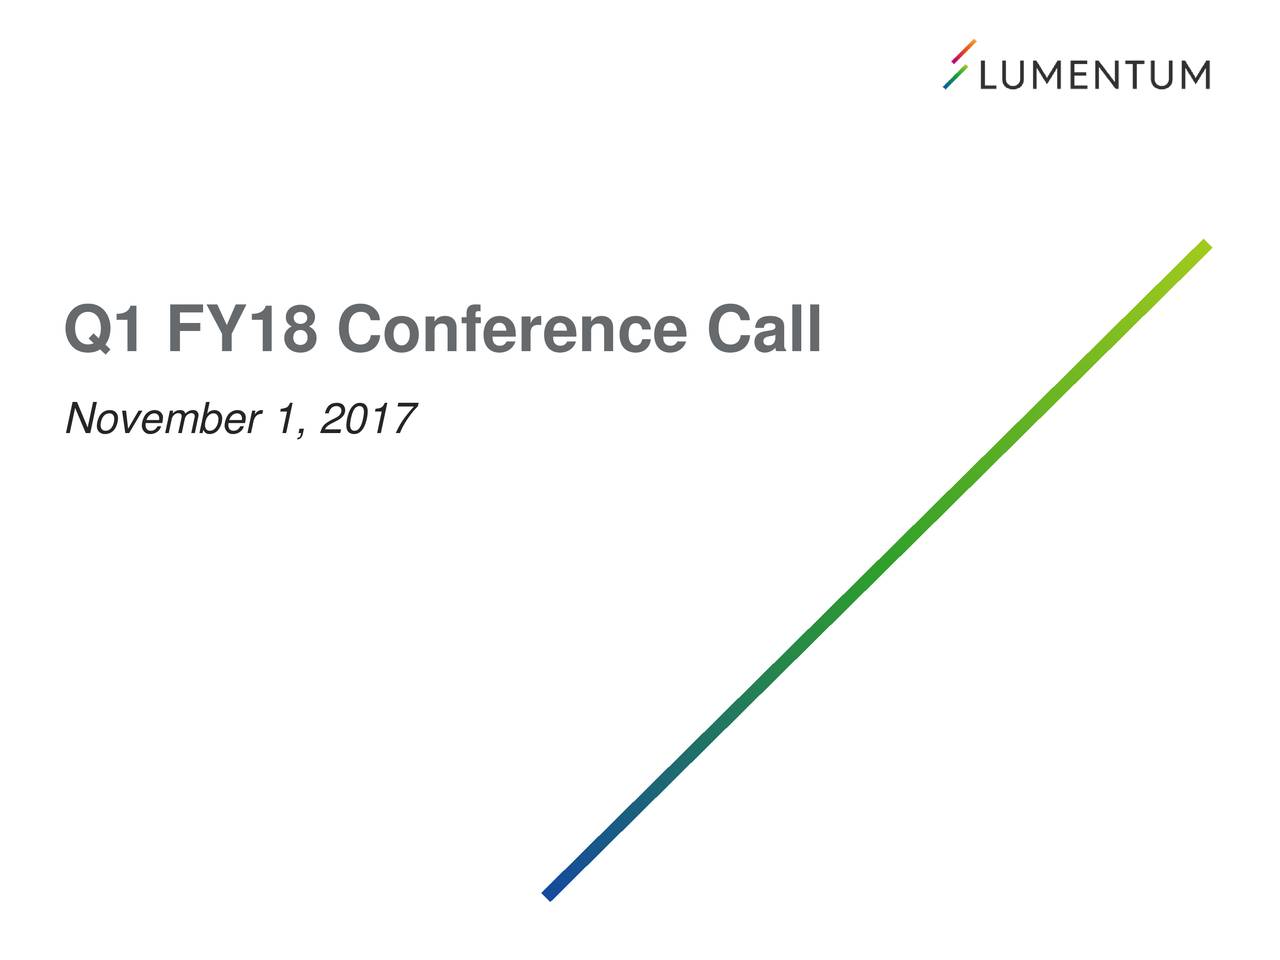 Q1 FY18 Conference Call